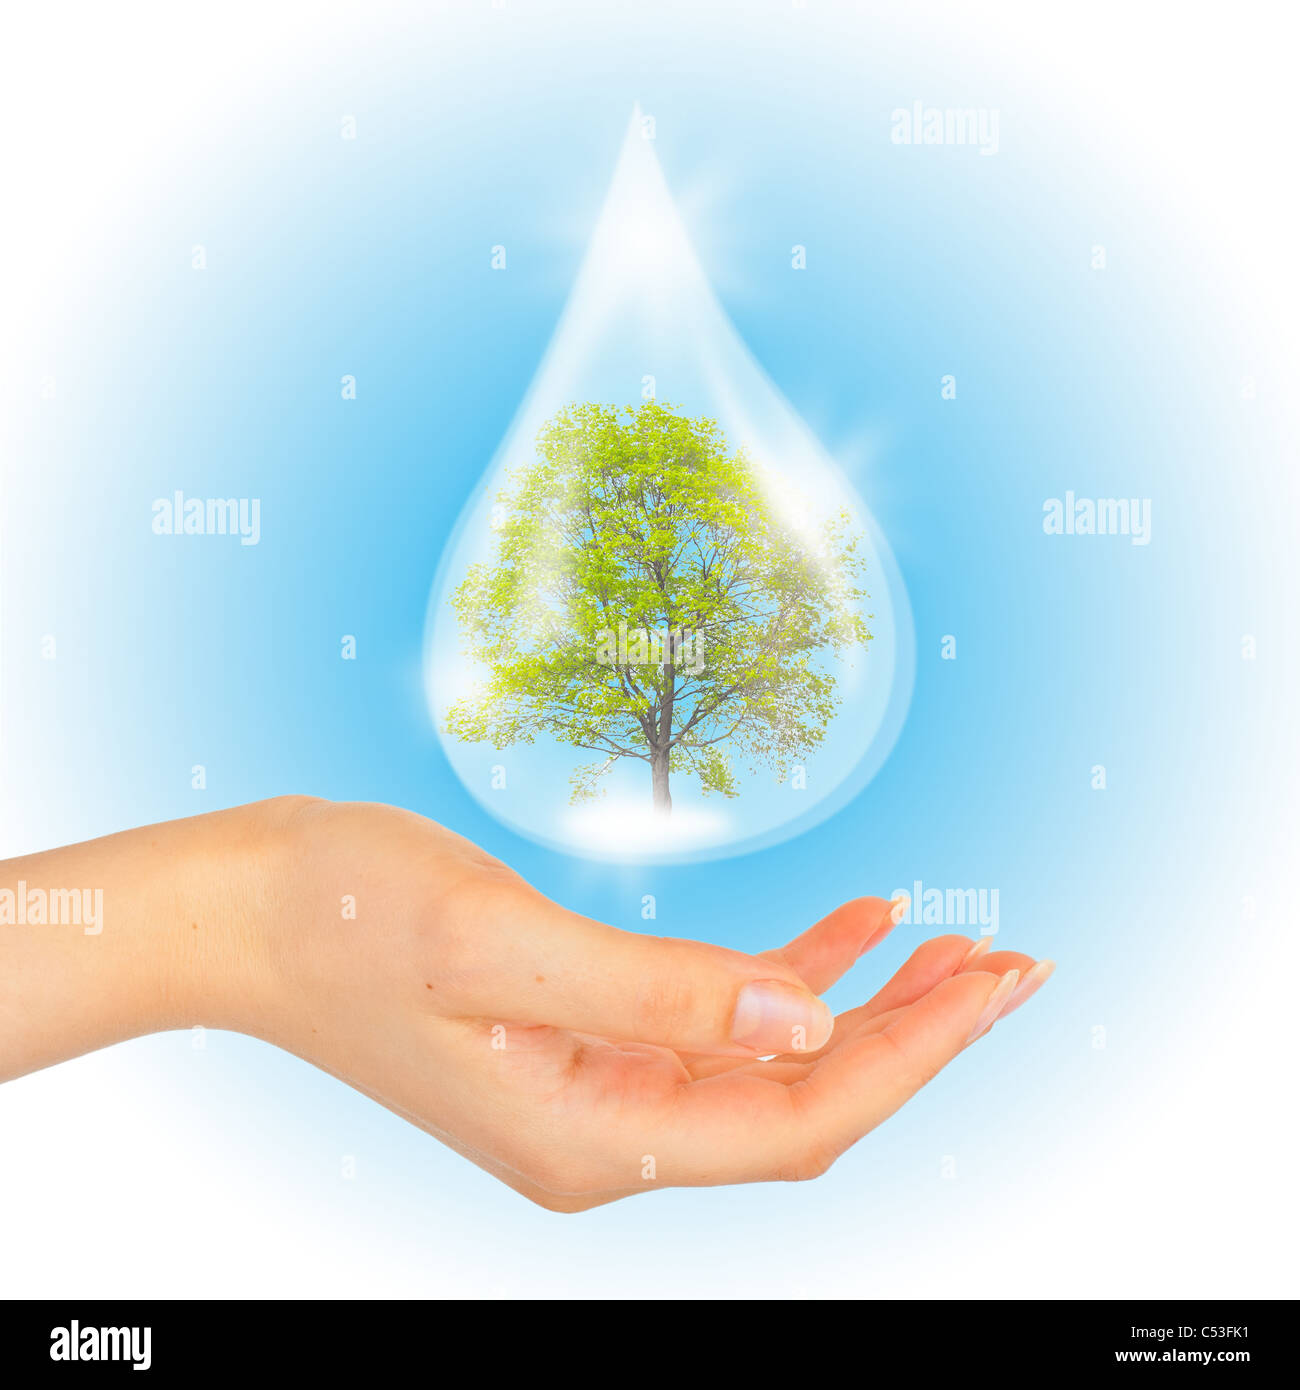 Drop of water with Tree inside and hand. The symbol of Save Green Planet. Stock Photo